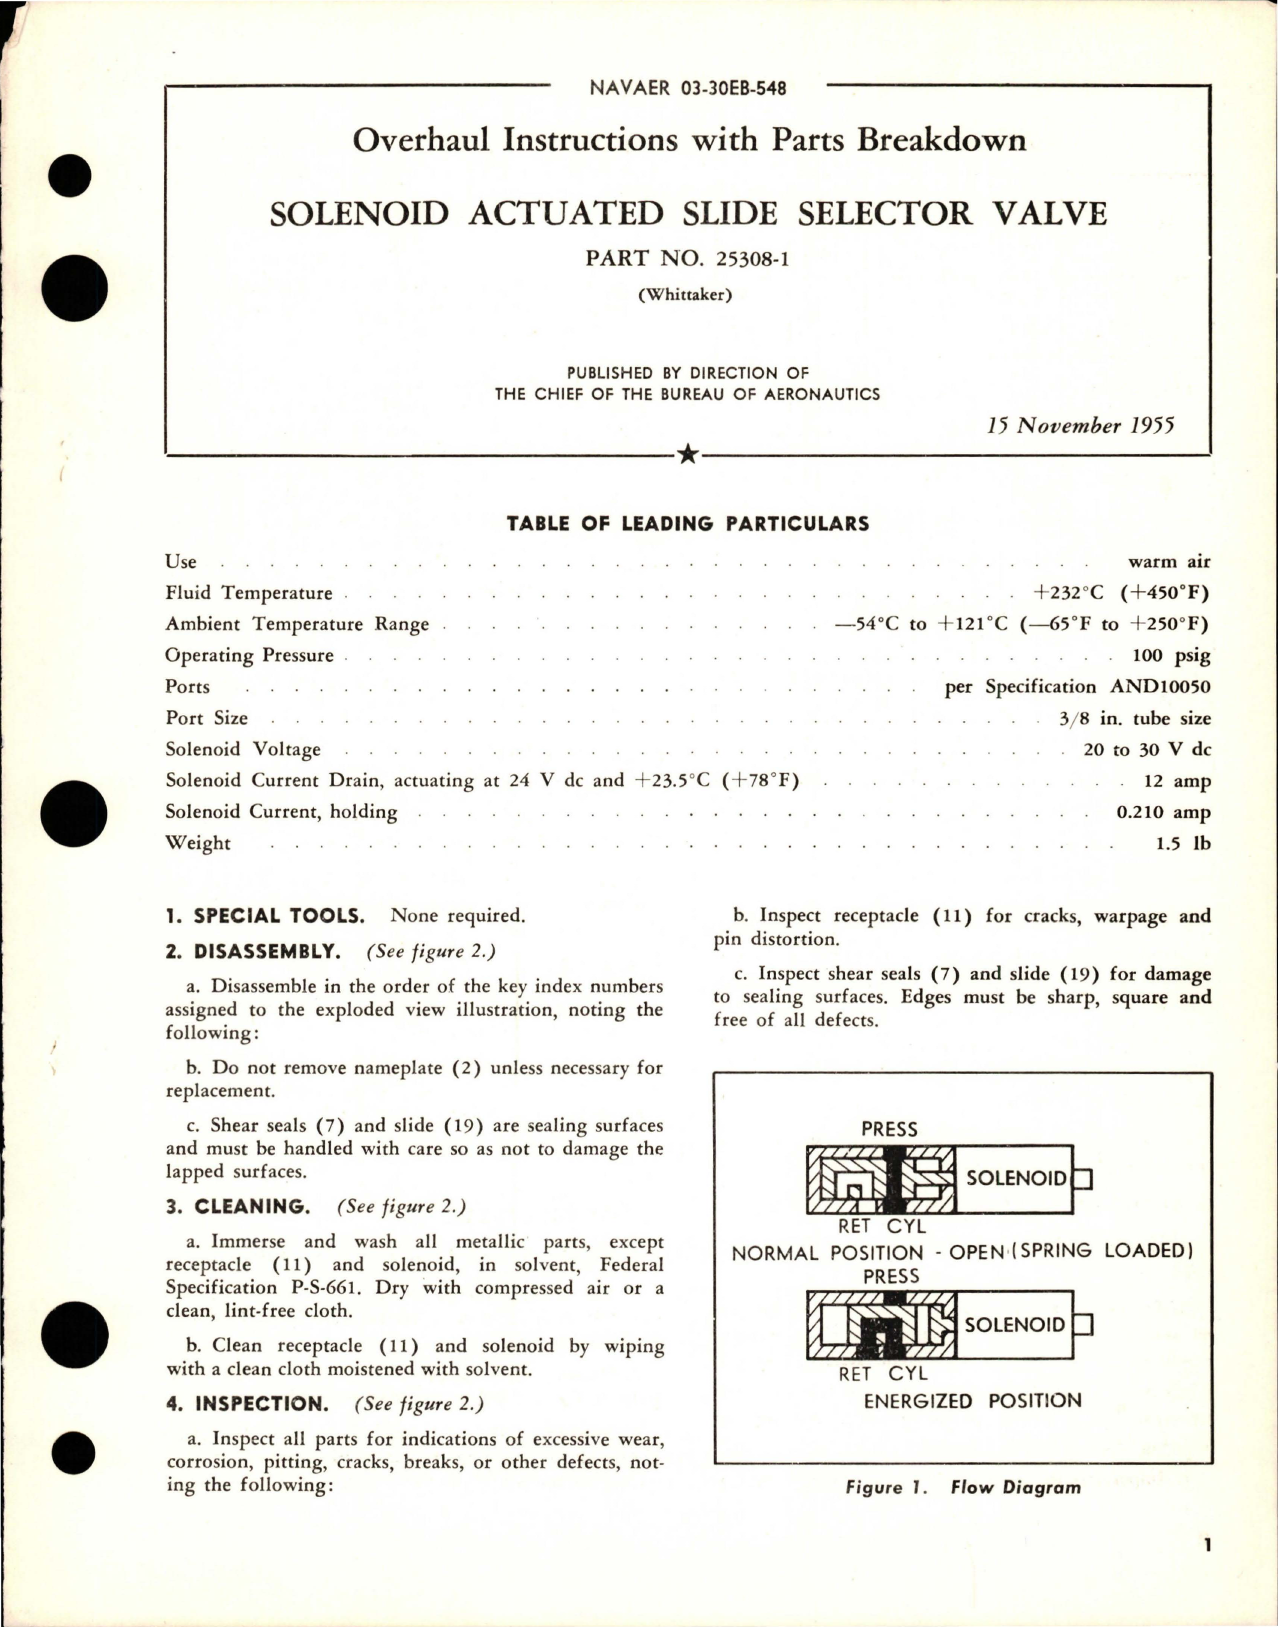 Sample page 1 from AirCorps Library document: Overhaul Instructions with Parts for Solenoid Actuated Slide Selector Valve - Part 25308-1